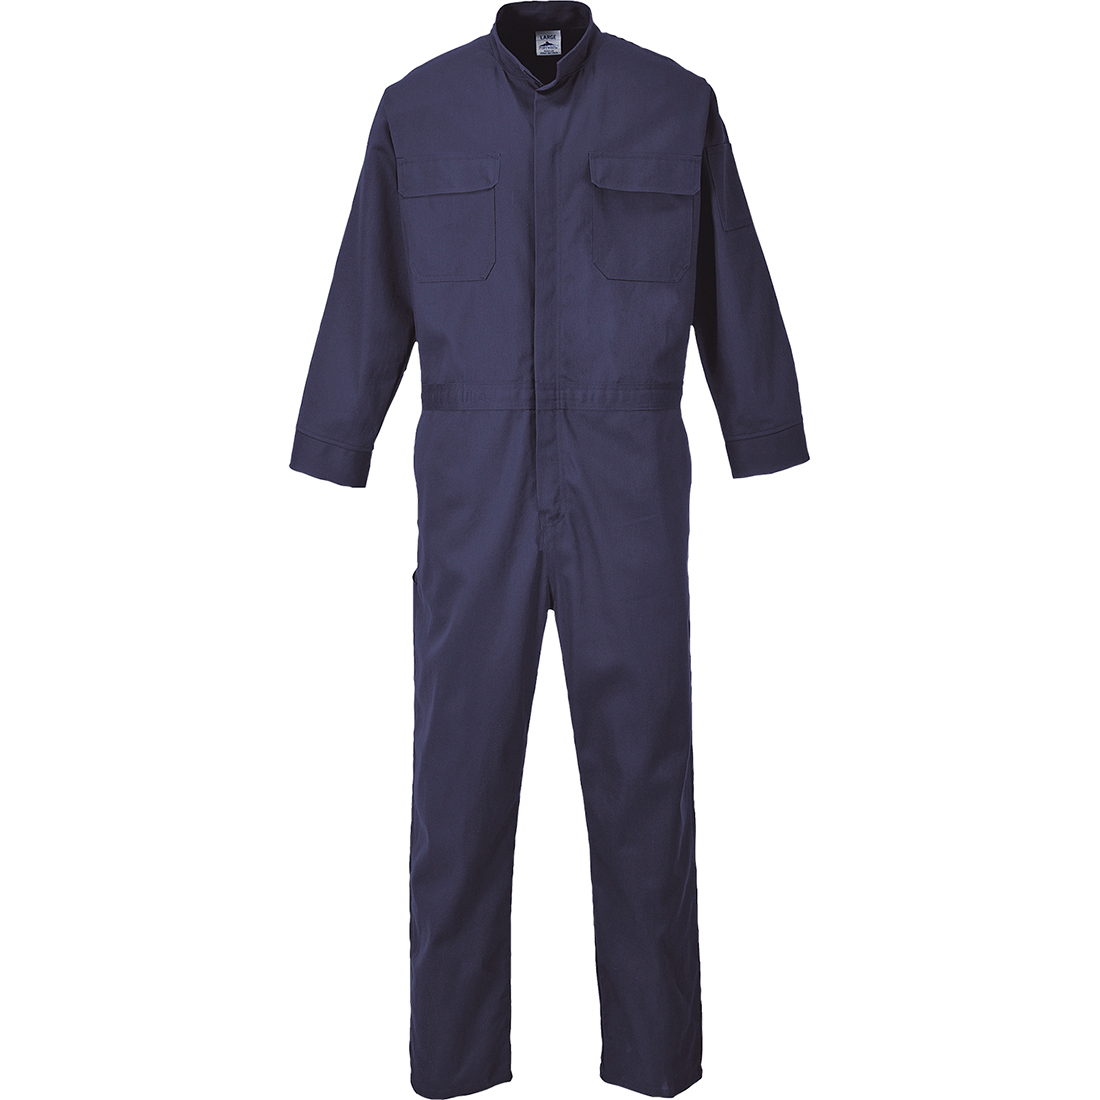 Bizflame 88/12 Coverall, Navy       Size Large R/Fit